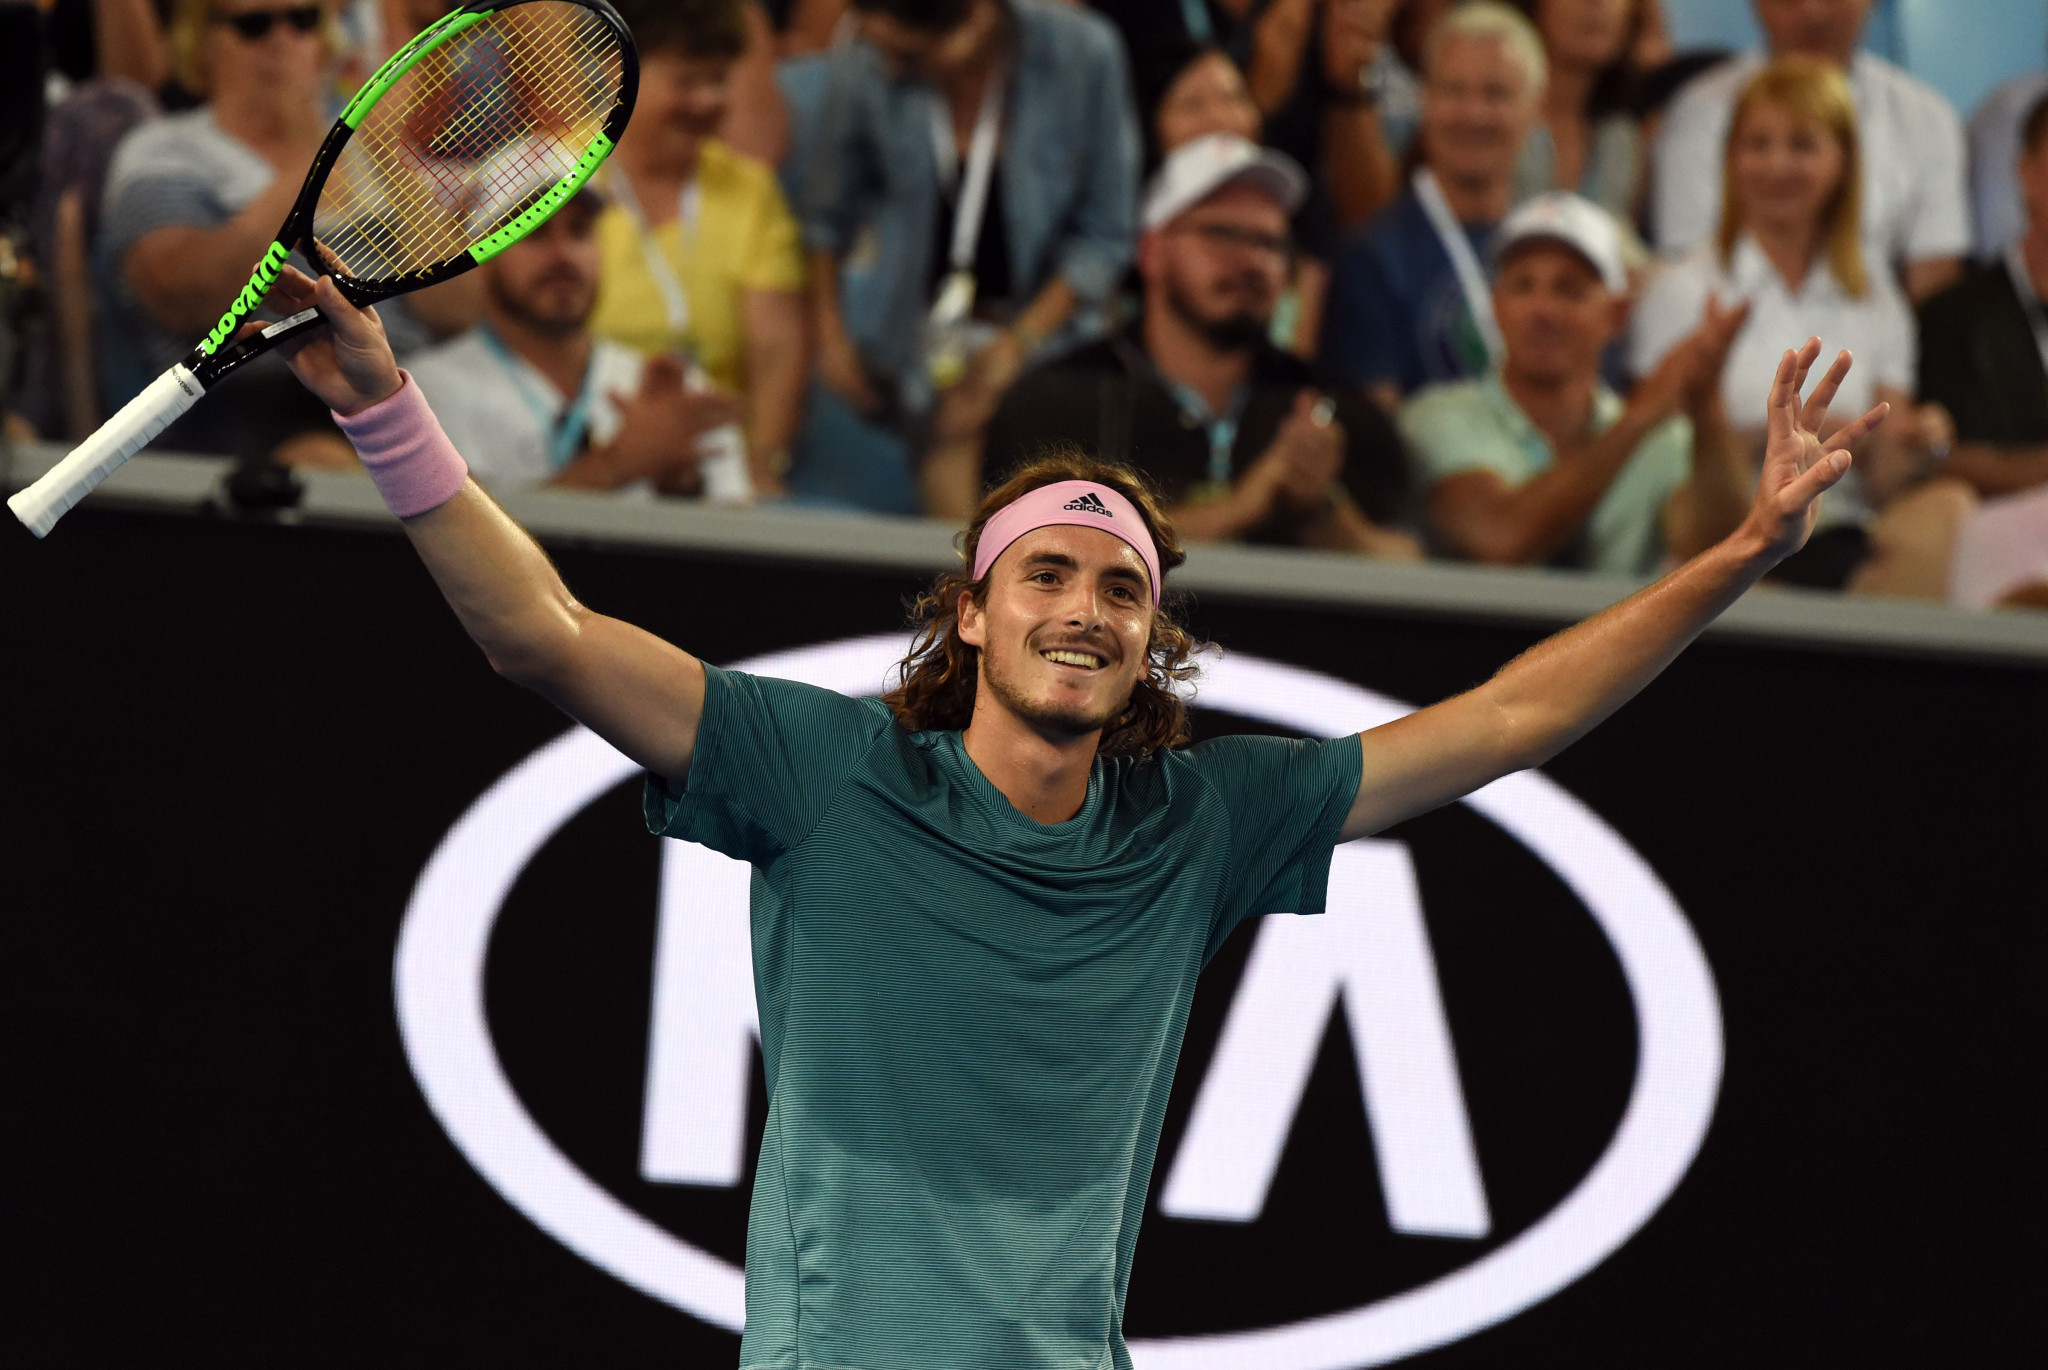 He will now face talented Greek youngster Stefanos Tsitsipas ©Getty Images